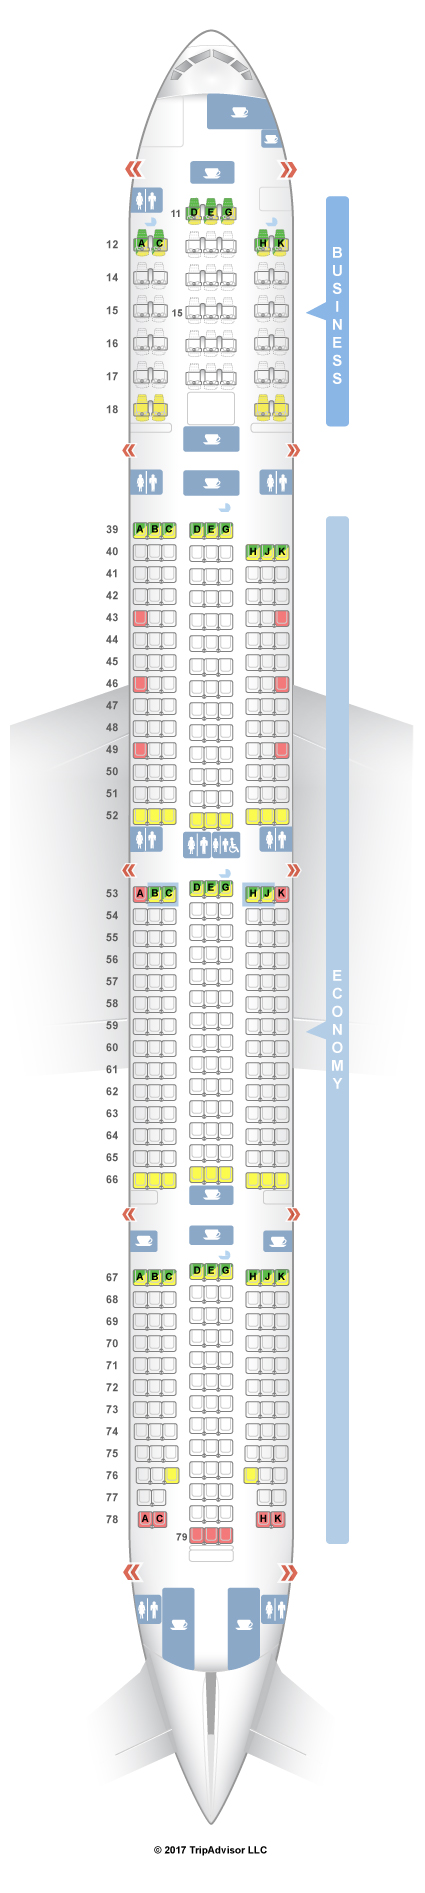 Boeing 777 300er 77w Seating Chart Cathay Pacific